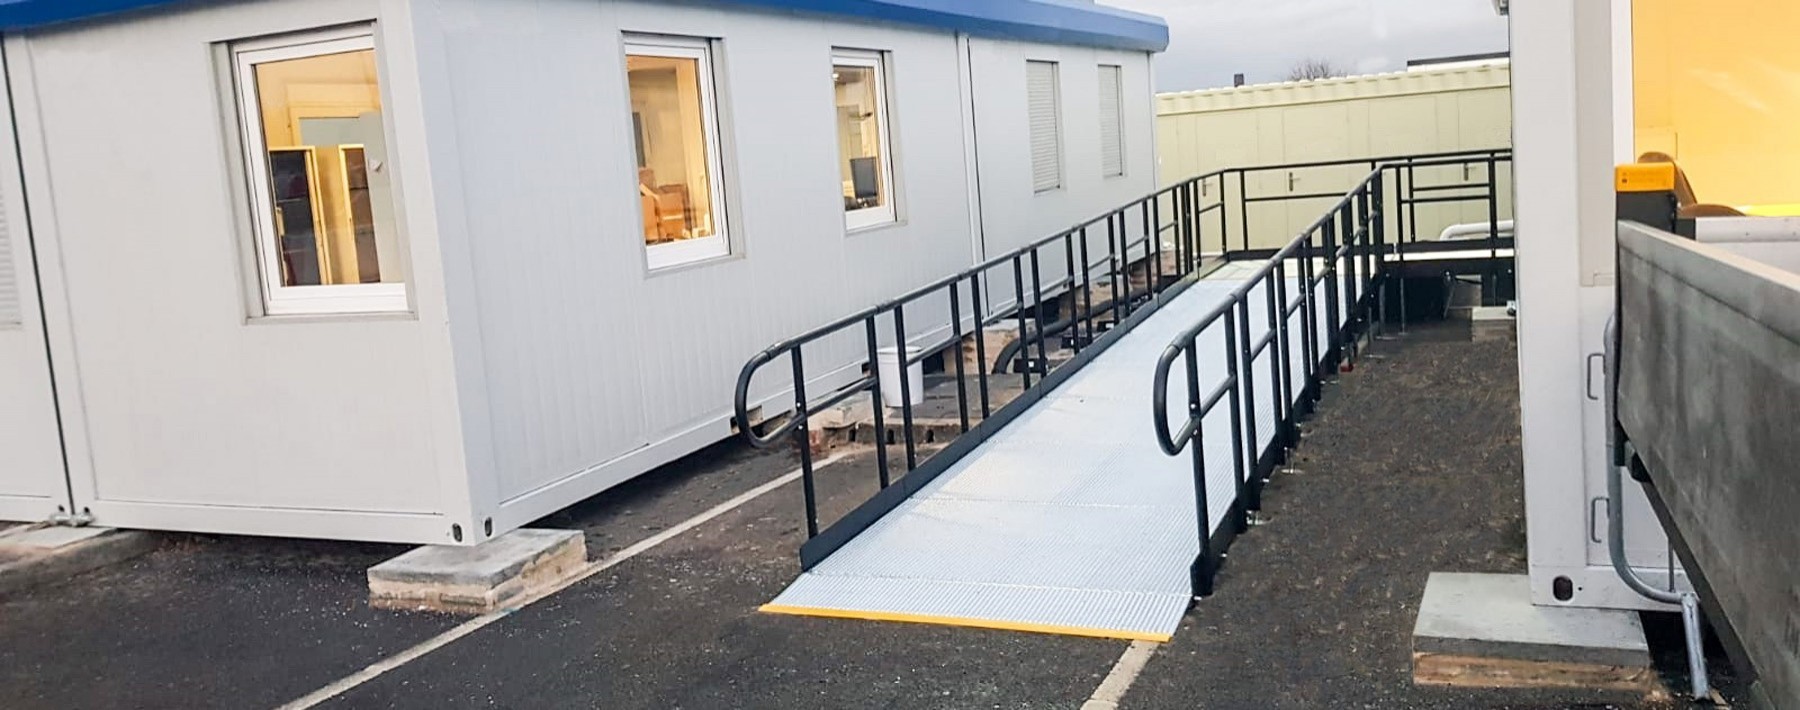 disabled toilet ramp